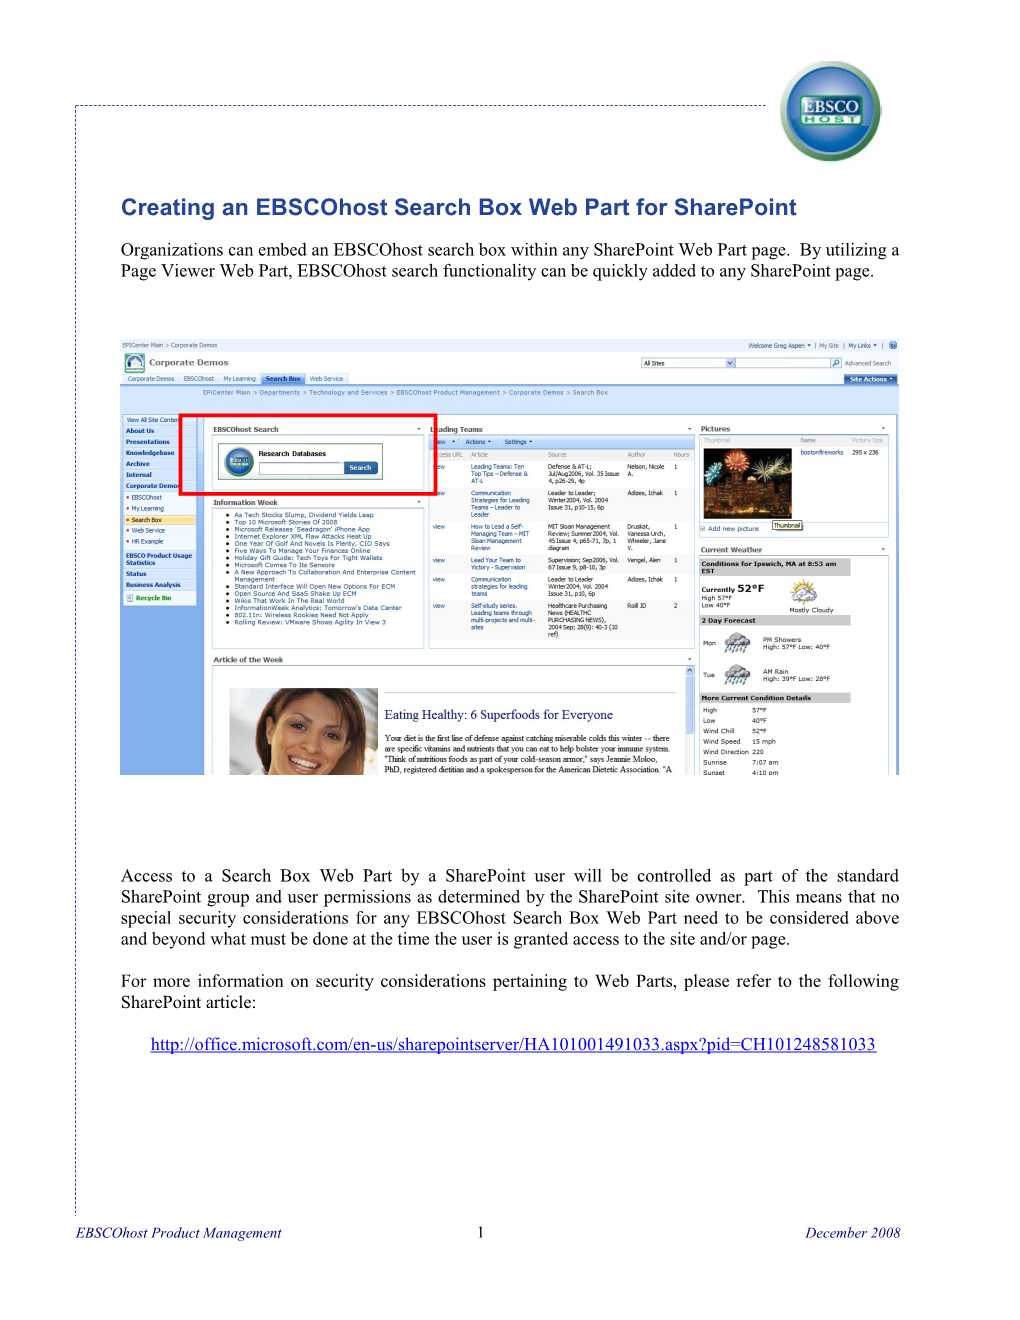 Creating an Ebscohost Search Box Web Part for Sharepoint